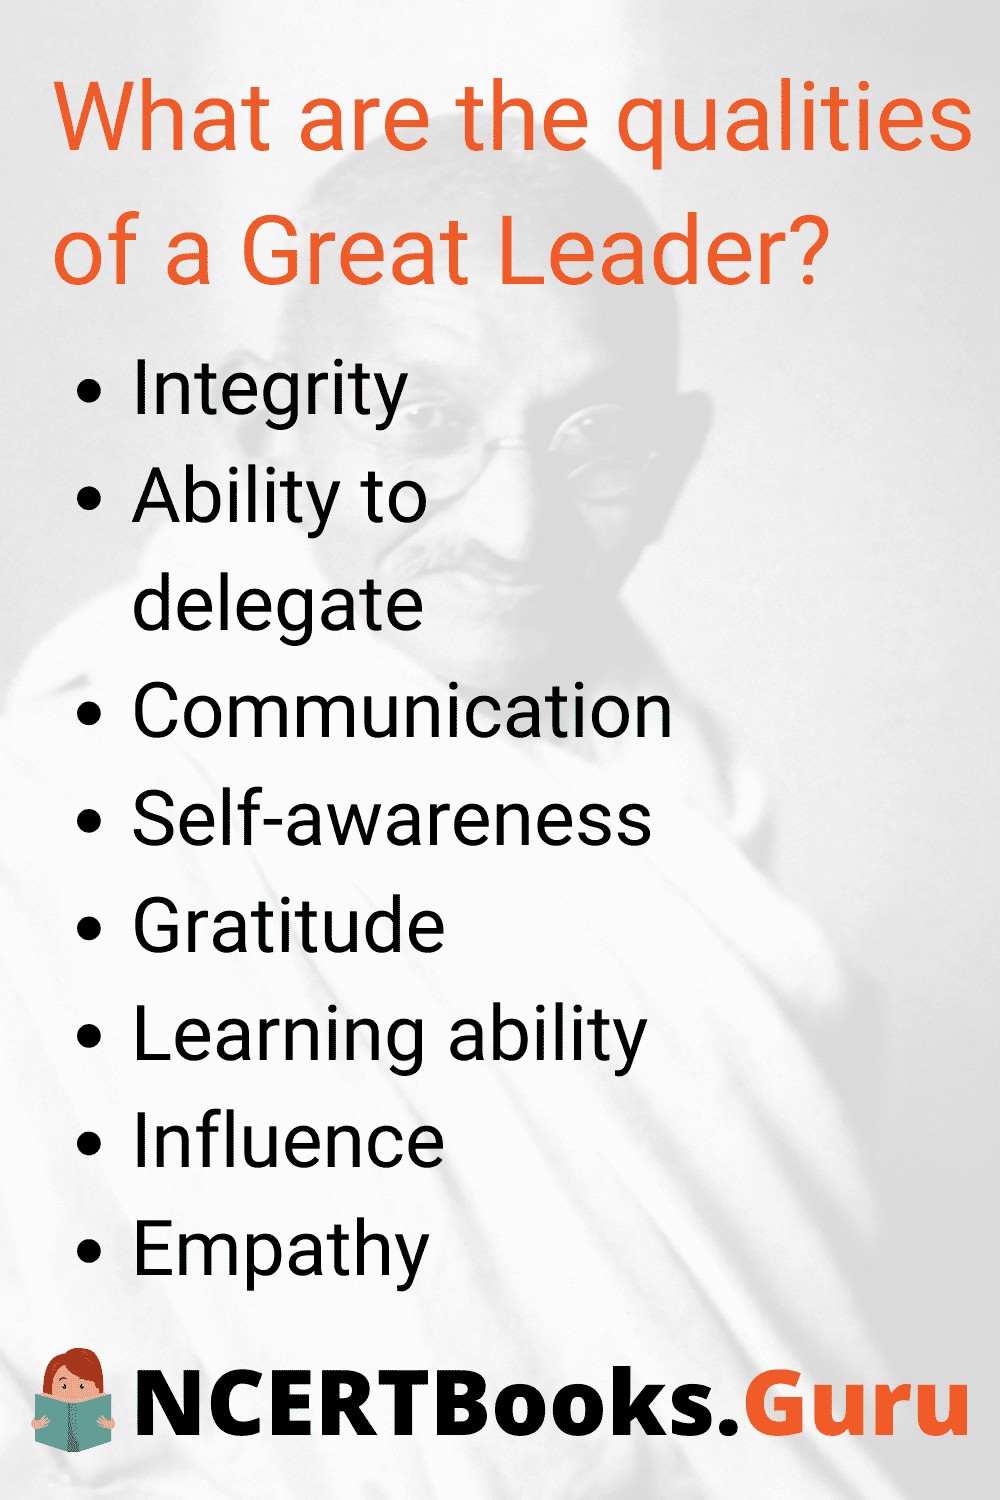 a great leader essay class 9